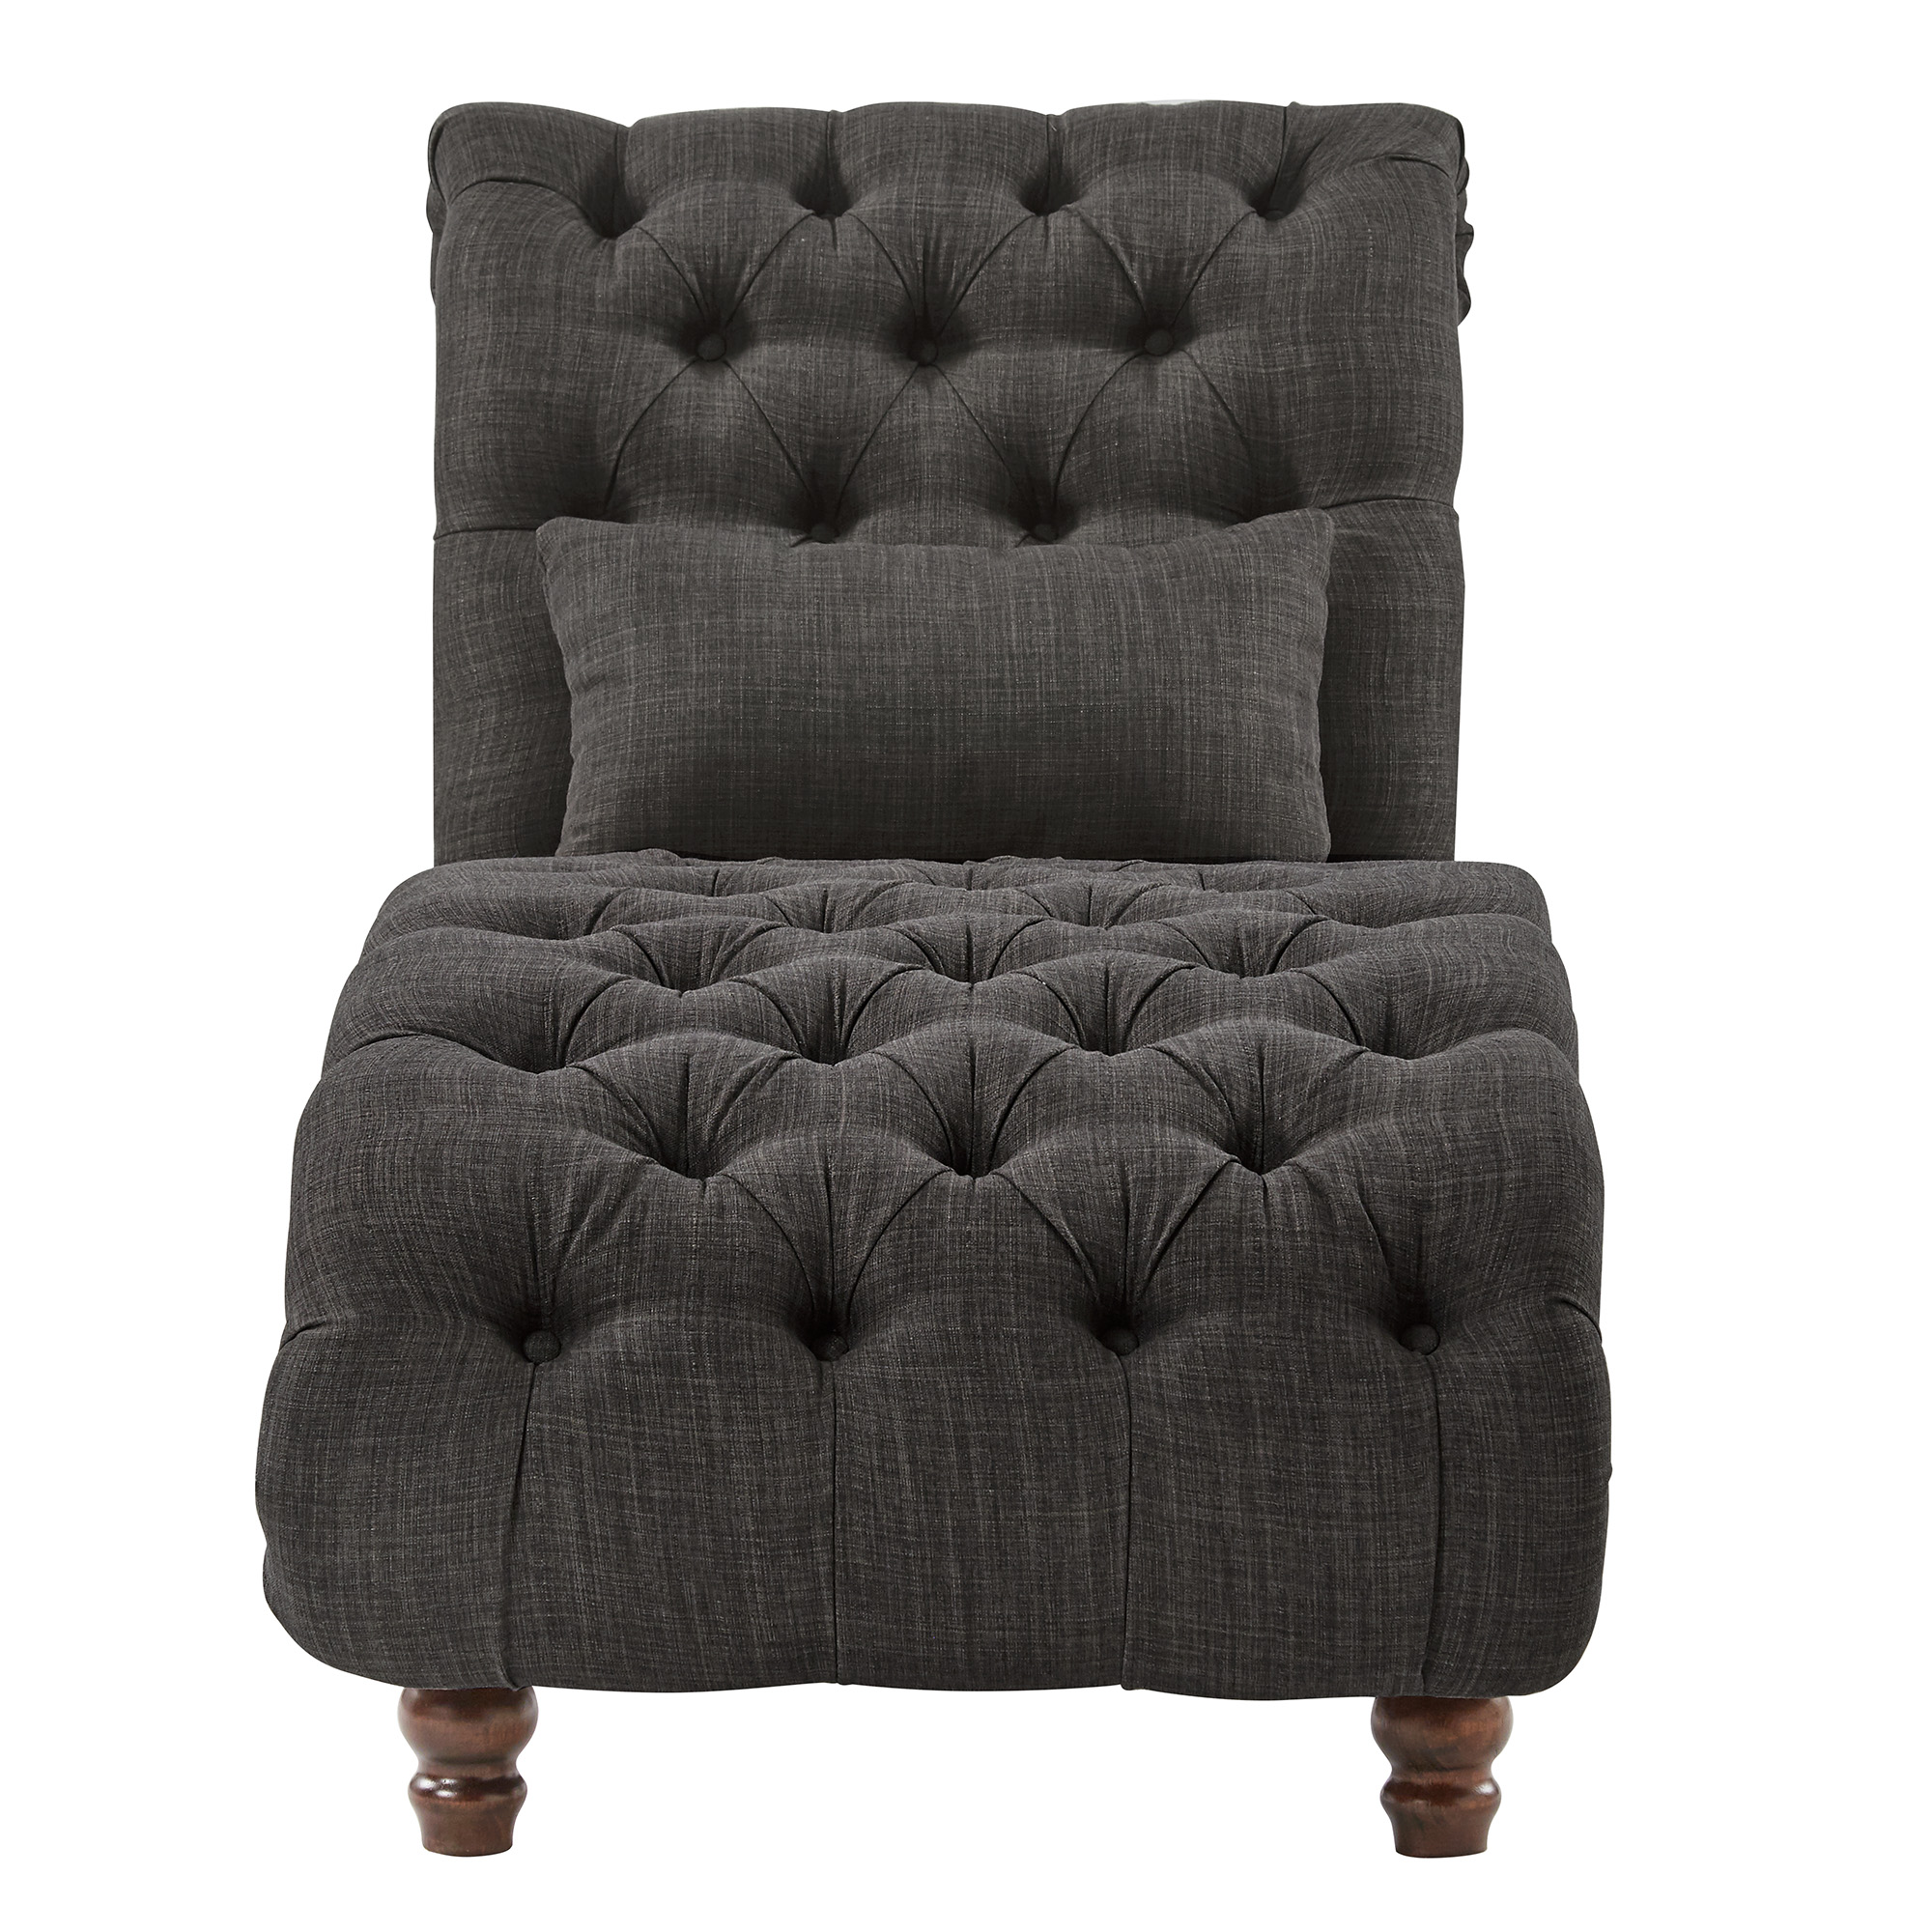 Weston Home Bowman Long Tufted Lounge Chair With Matching Pillow, Dark Gray Linen - image 5 of 6